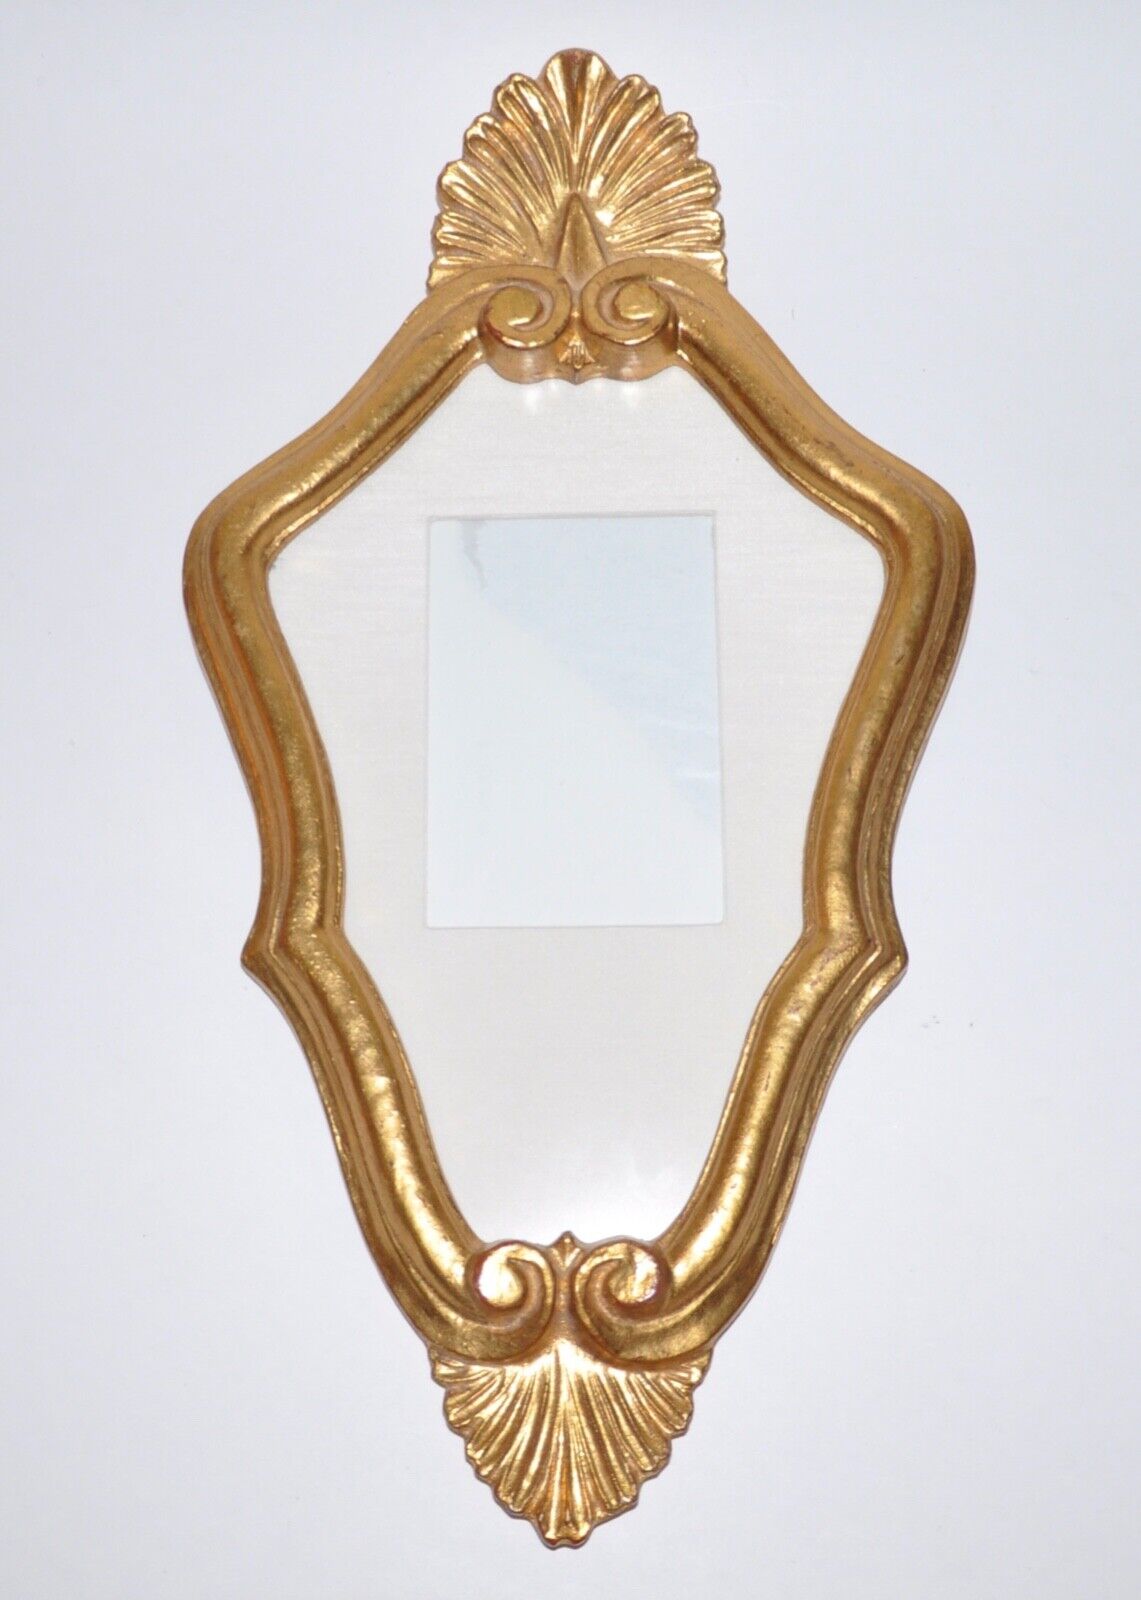 Antique Gilded Wood Gold Rococo Scalloped Ornate Picture Frame